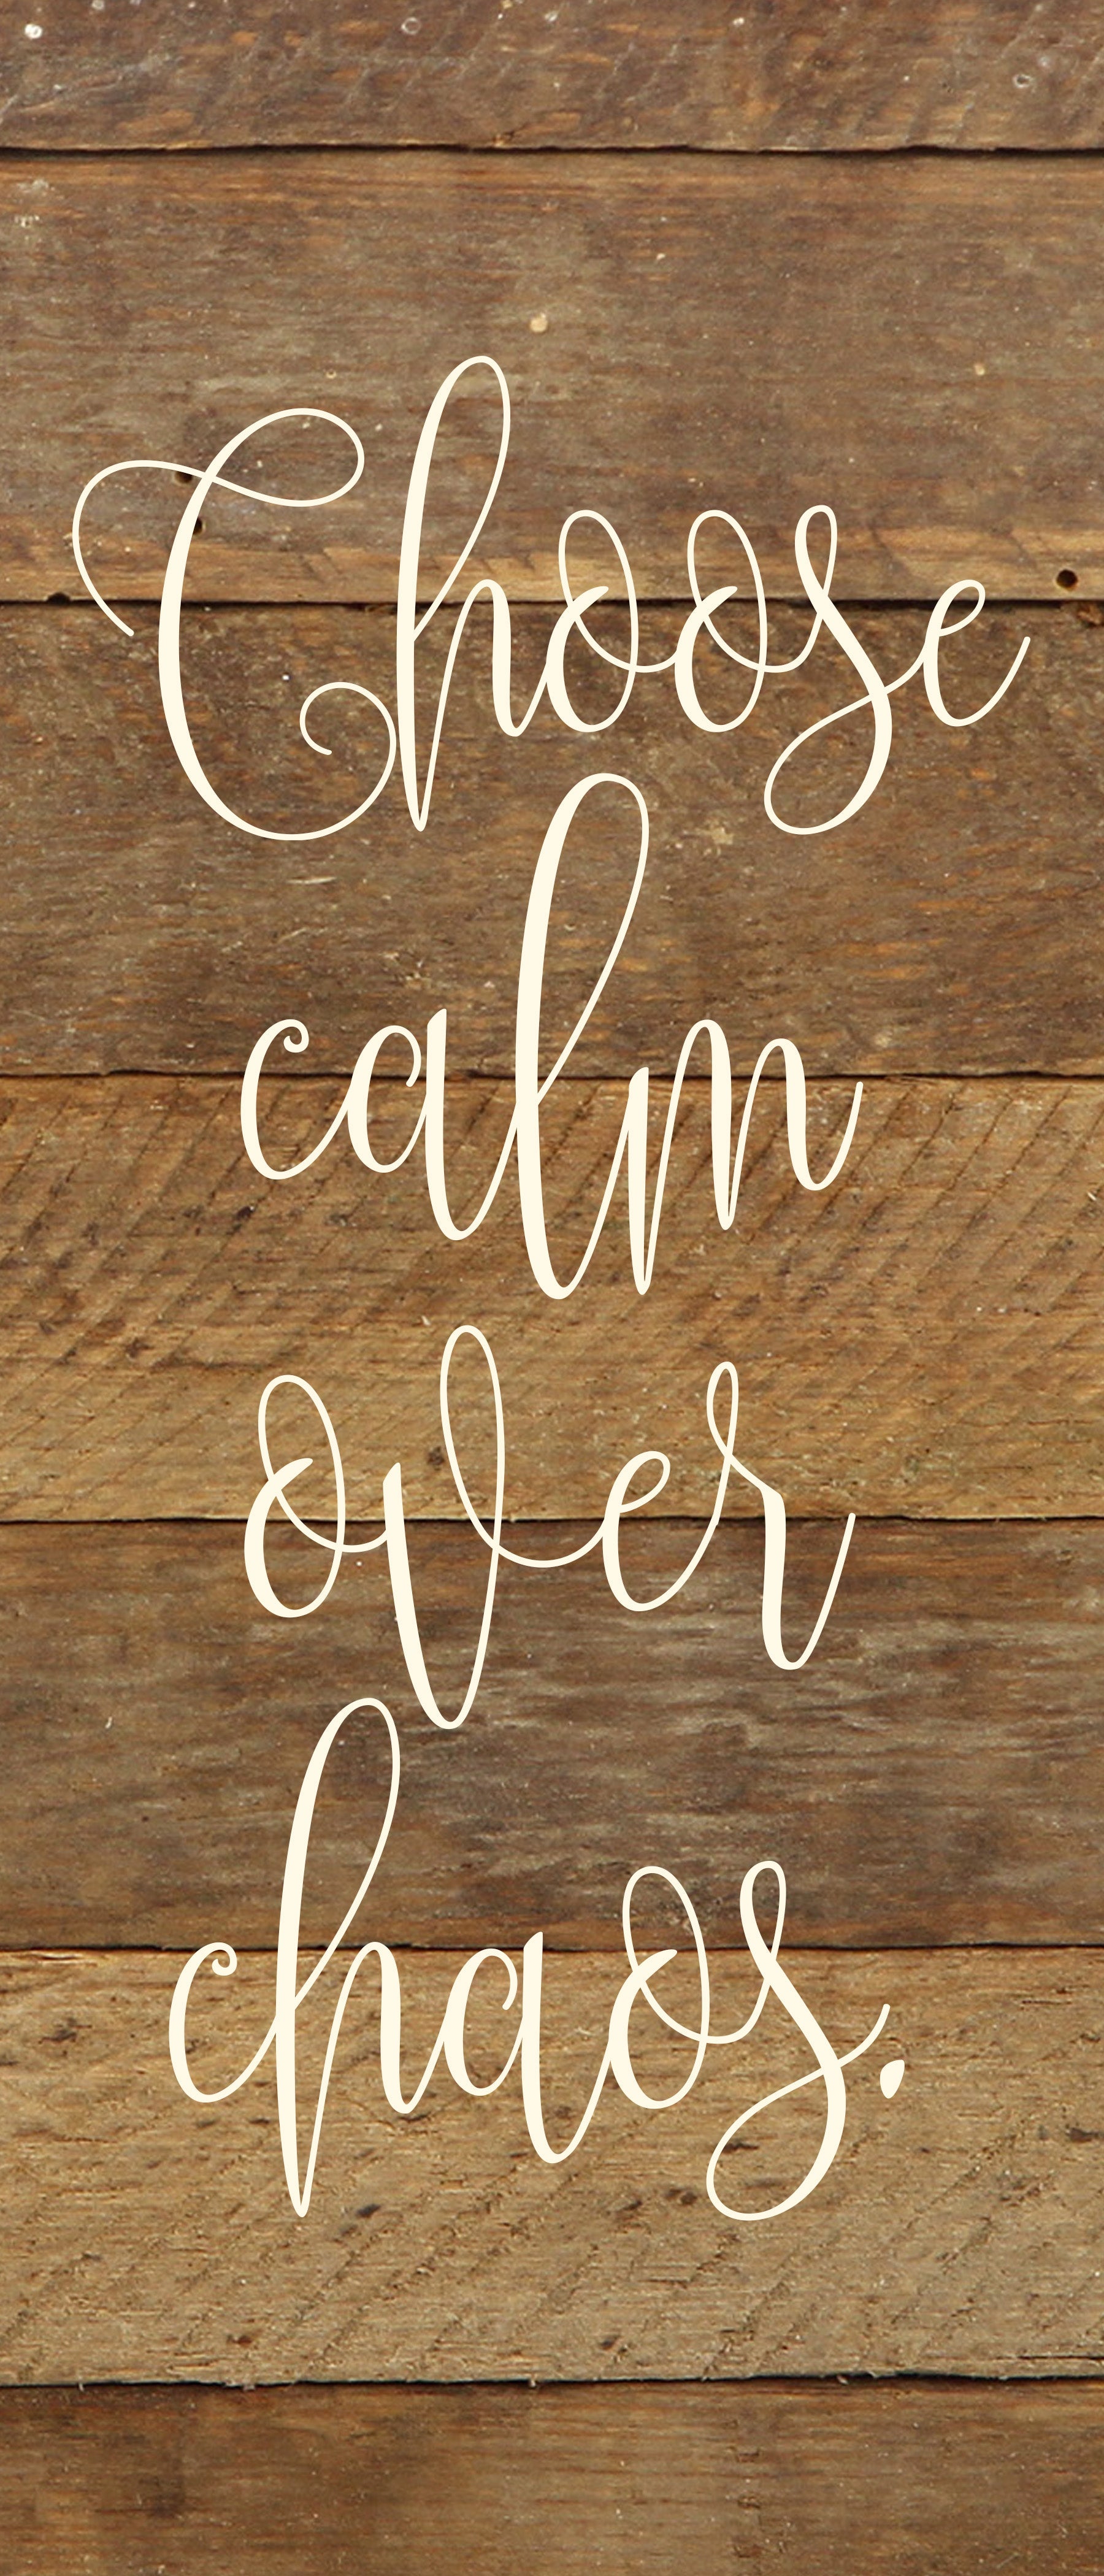 Choose calm over chaos. / 6"x14" Reclaimed Wood Sign